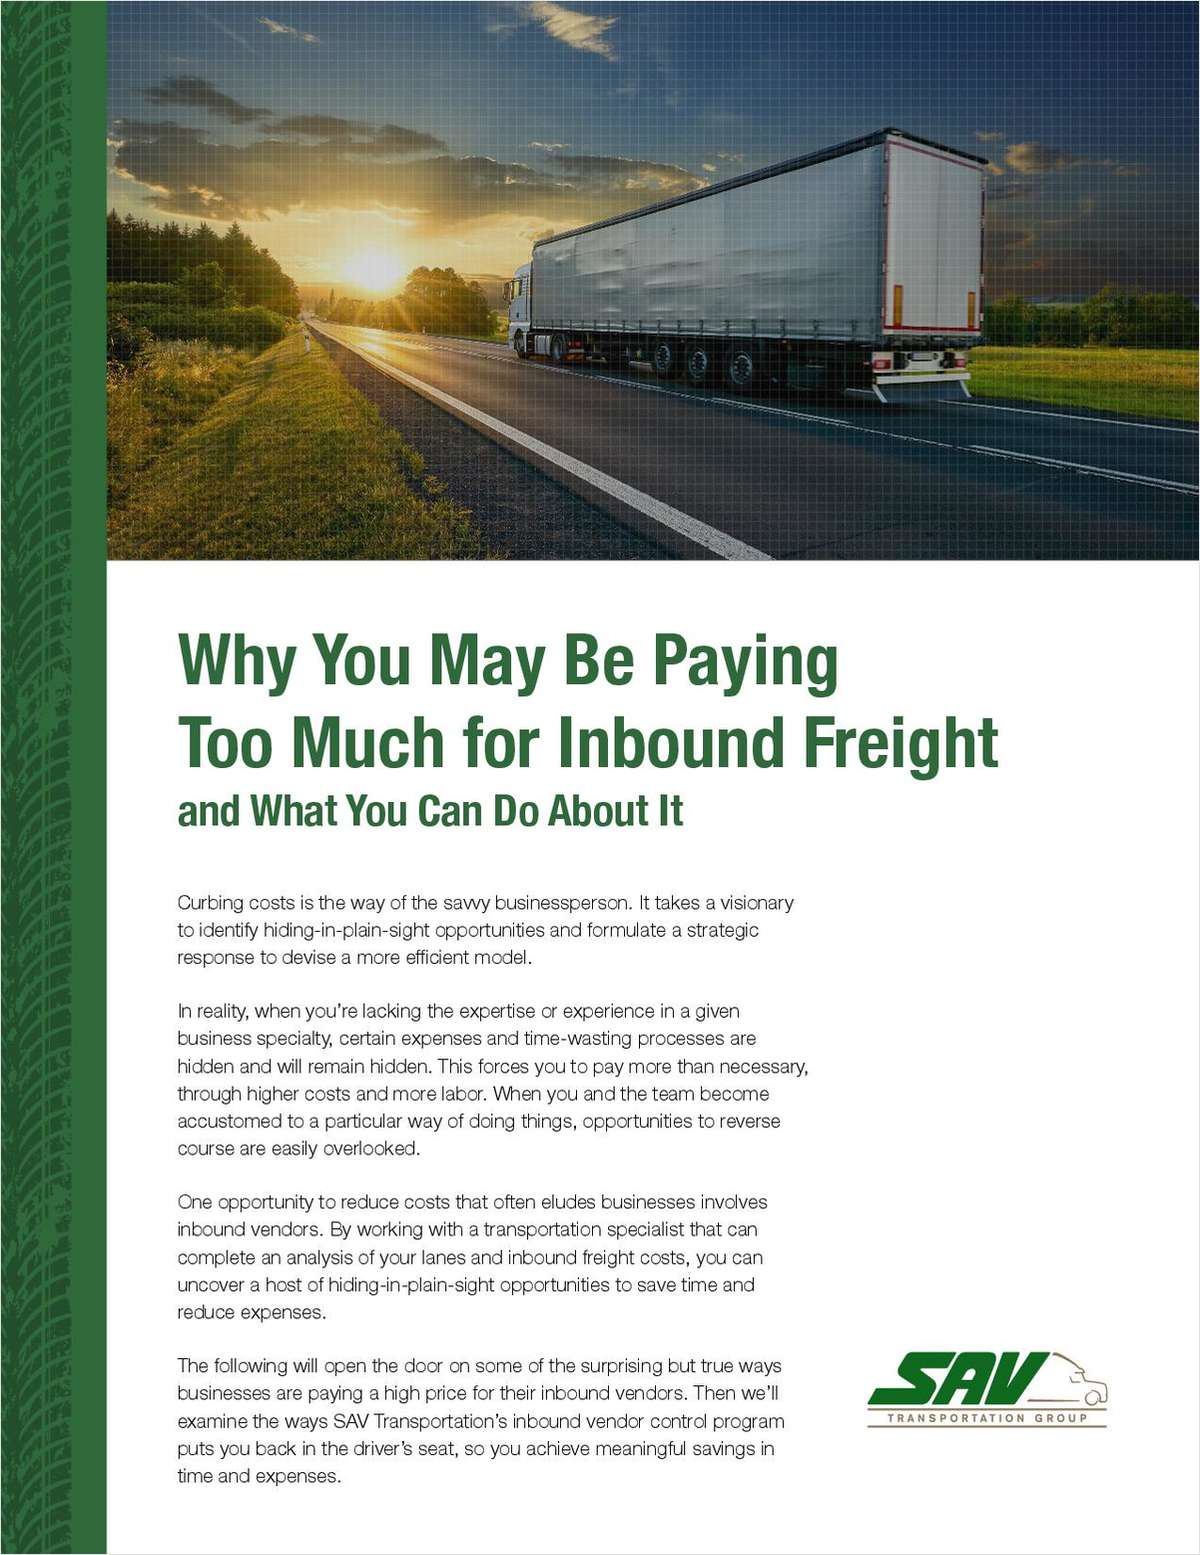 The Ultimate Solution to Curbing Excess Costs on Inbound Shipping